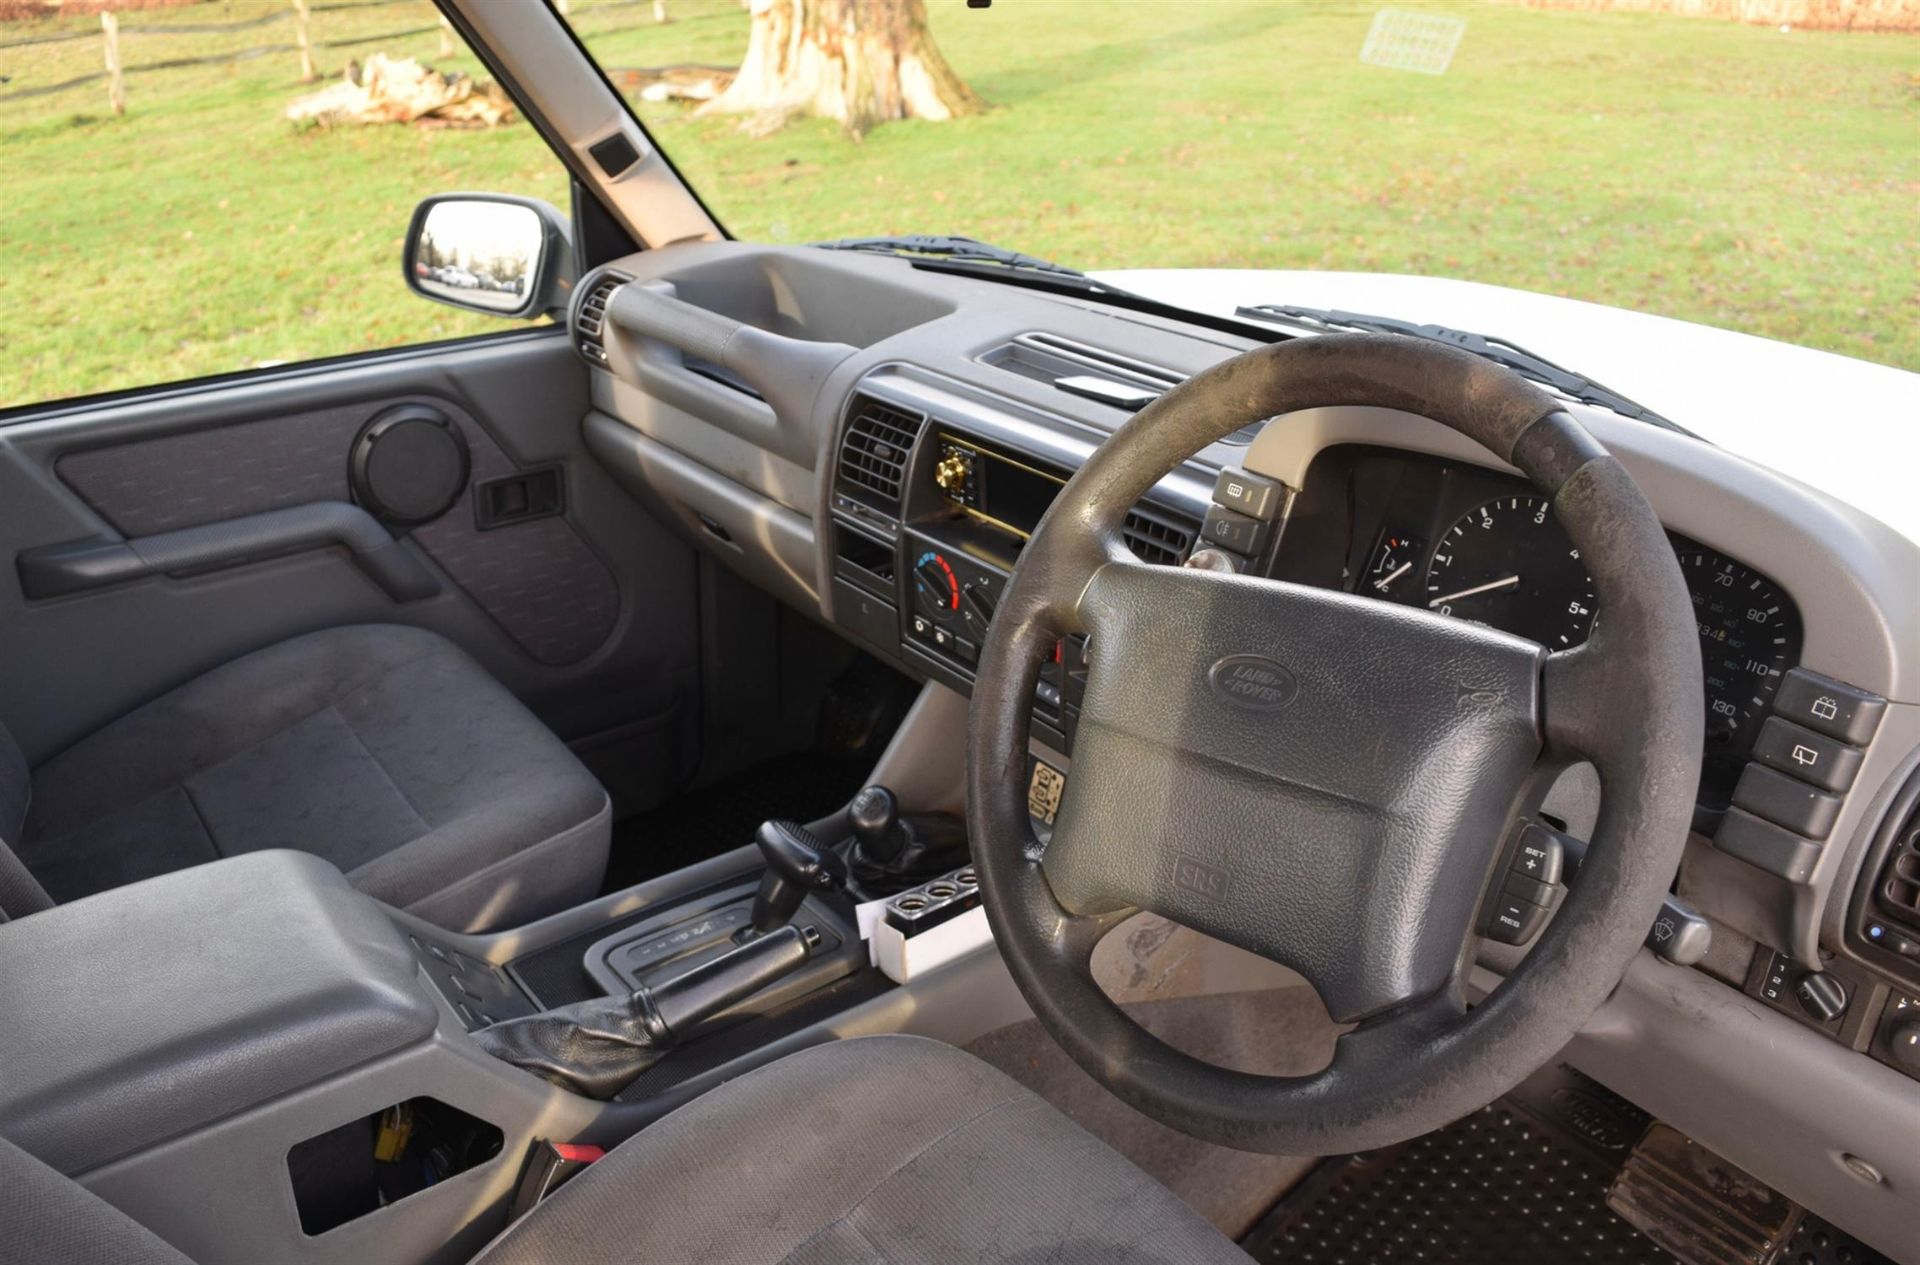 1998 Land Rover Discovery 2-Door R41 KAA. 2-door Land Rover Discovery 300 TDI, which was first - Image 38 of 41